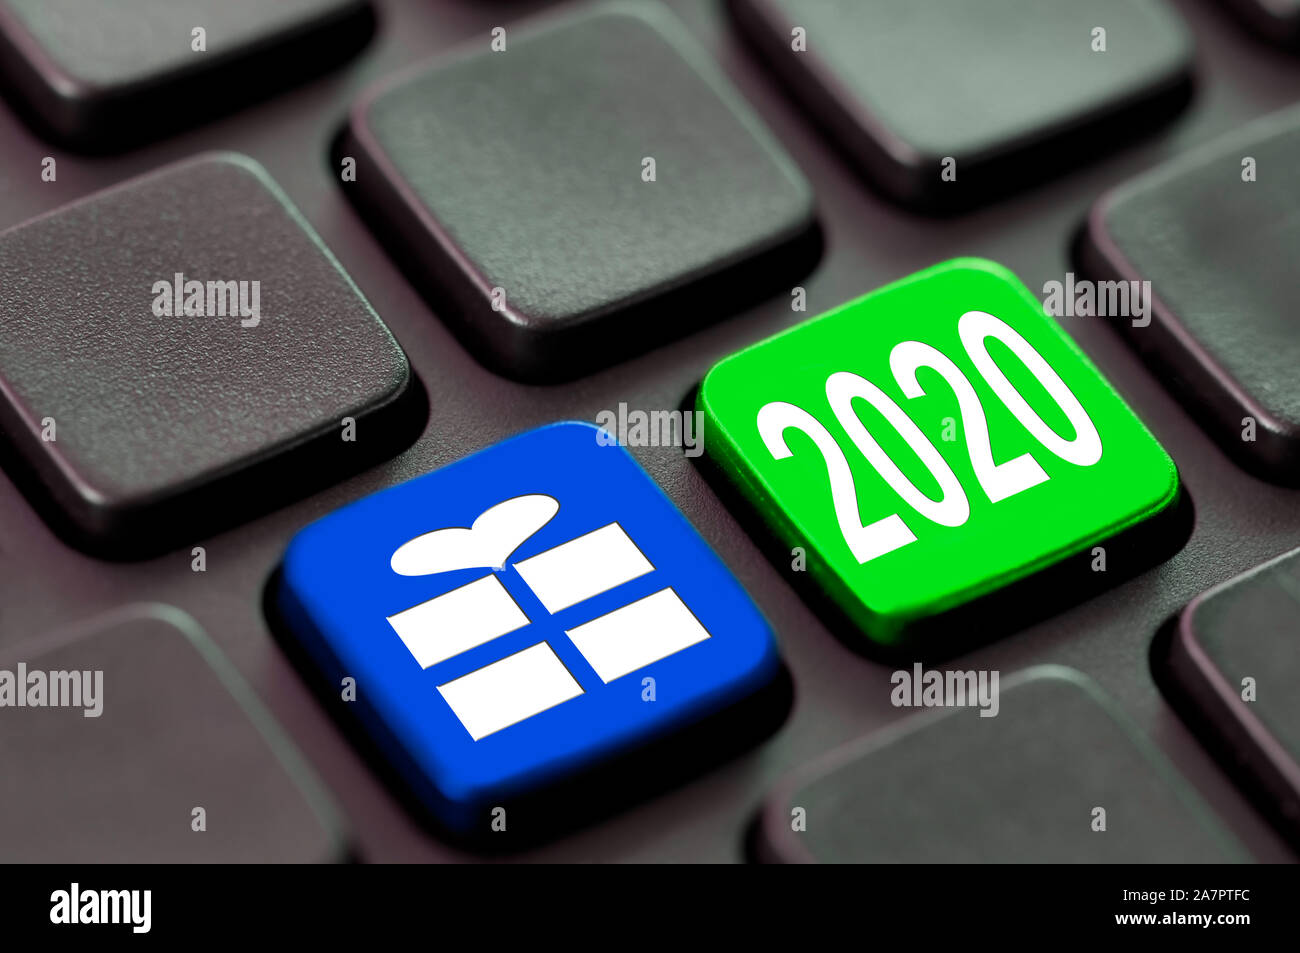 2020 and a gift icon written on a computer keyboard, new year and christmas online shopping concept Stock Photo